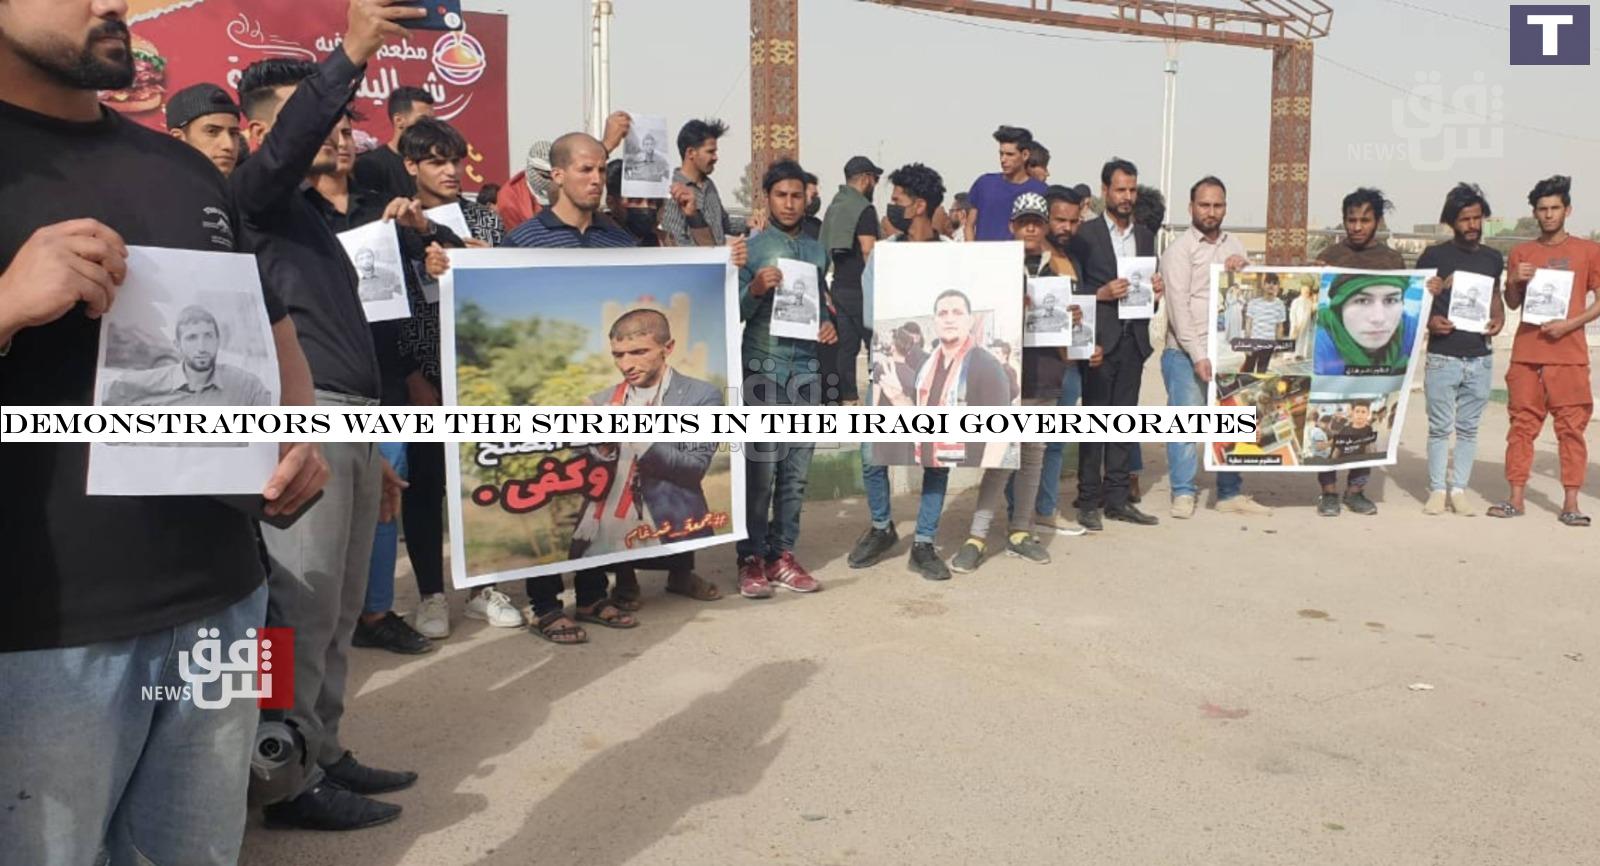 Demonstrators wave the streets in the Iraqi governorates